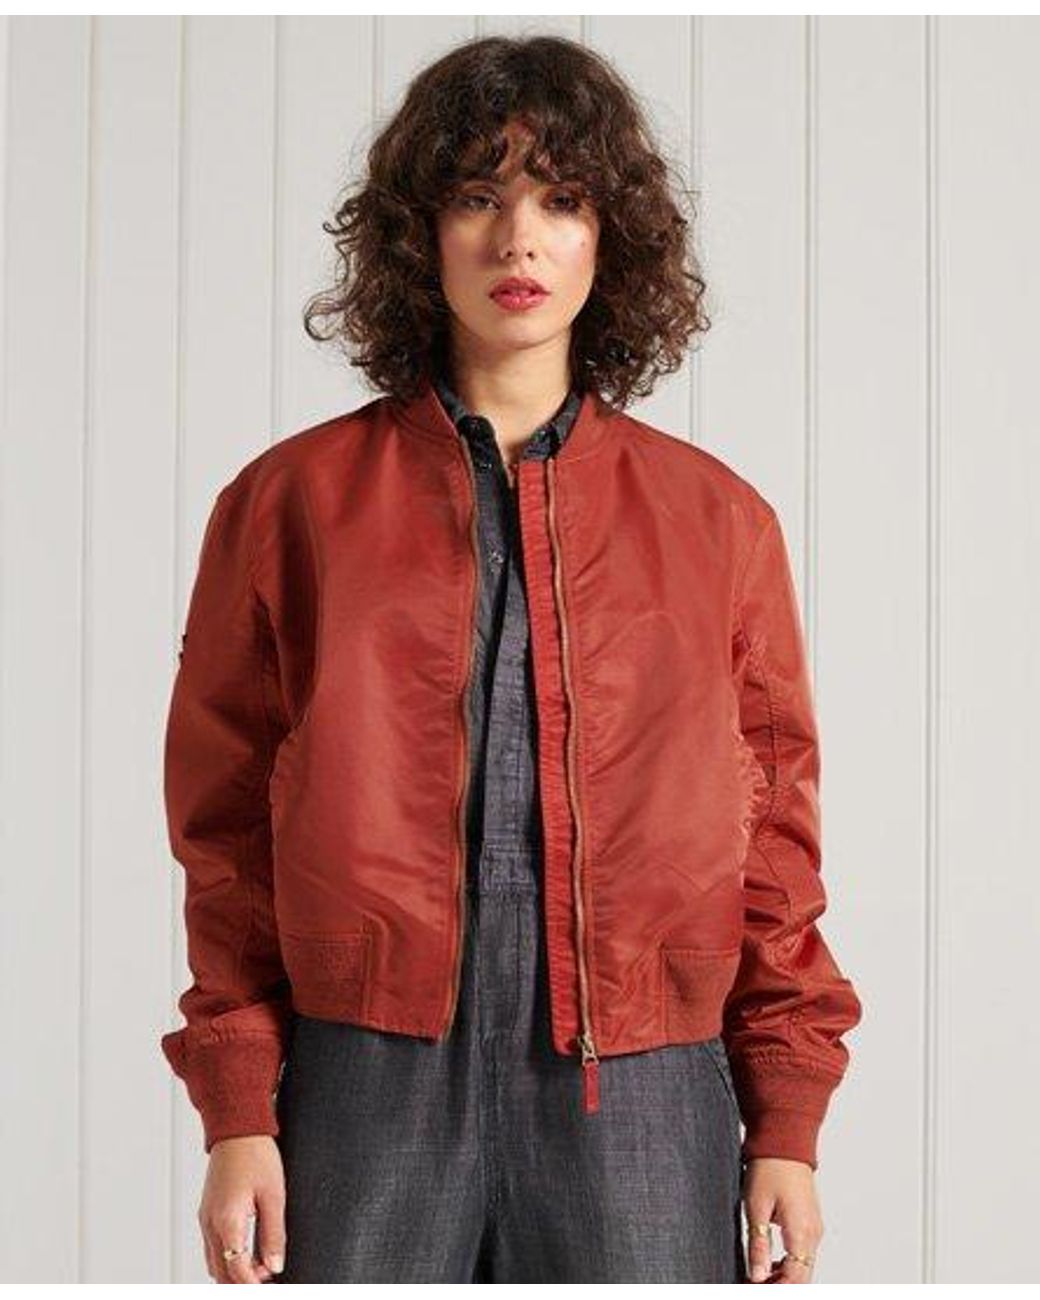 Ma1 bomber jacket in Red, Plain Pattern